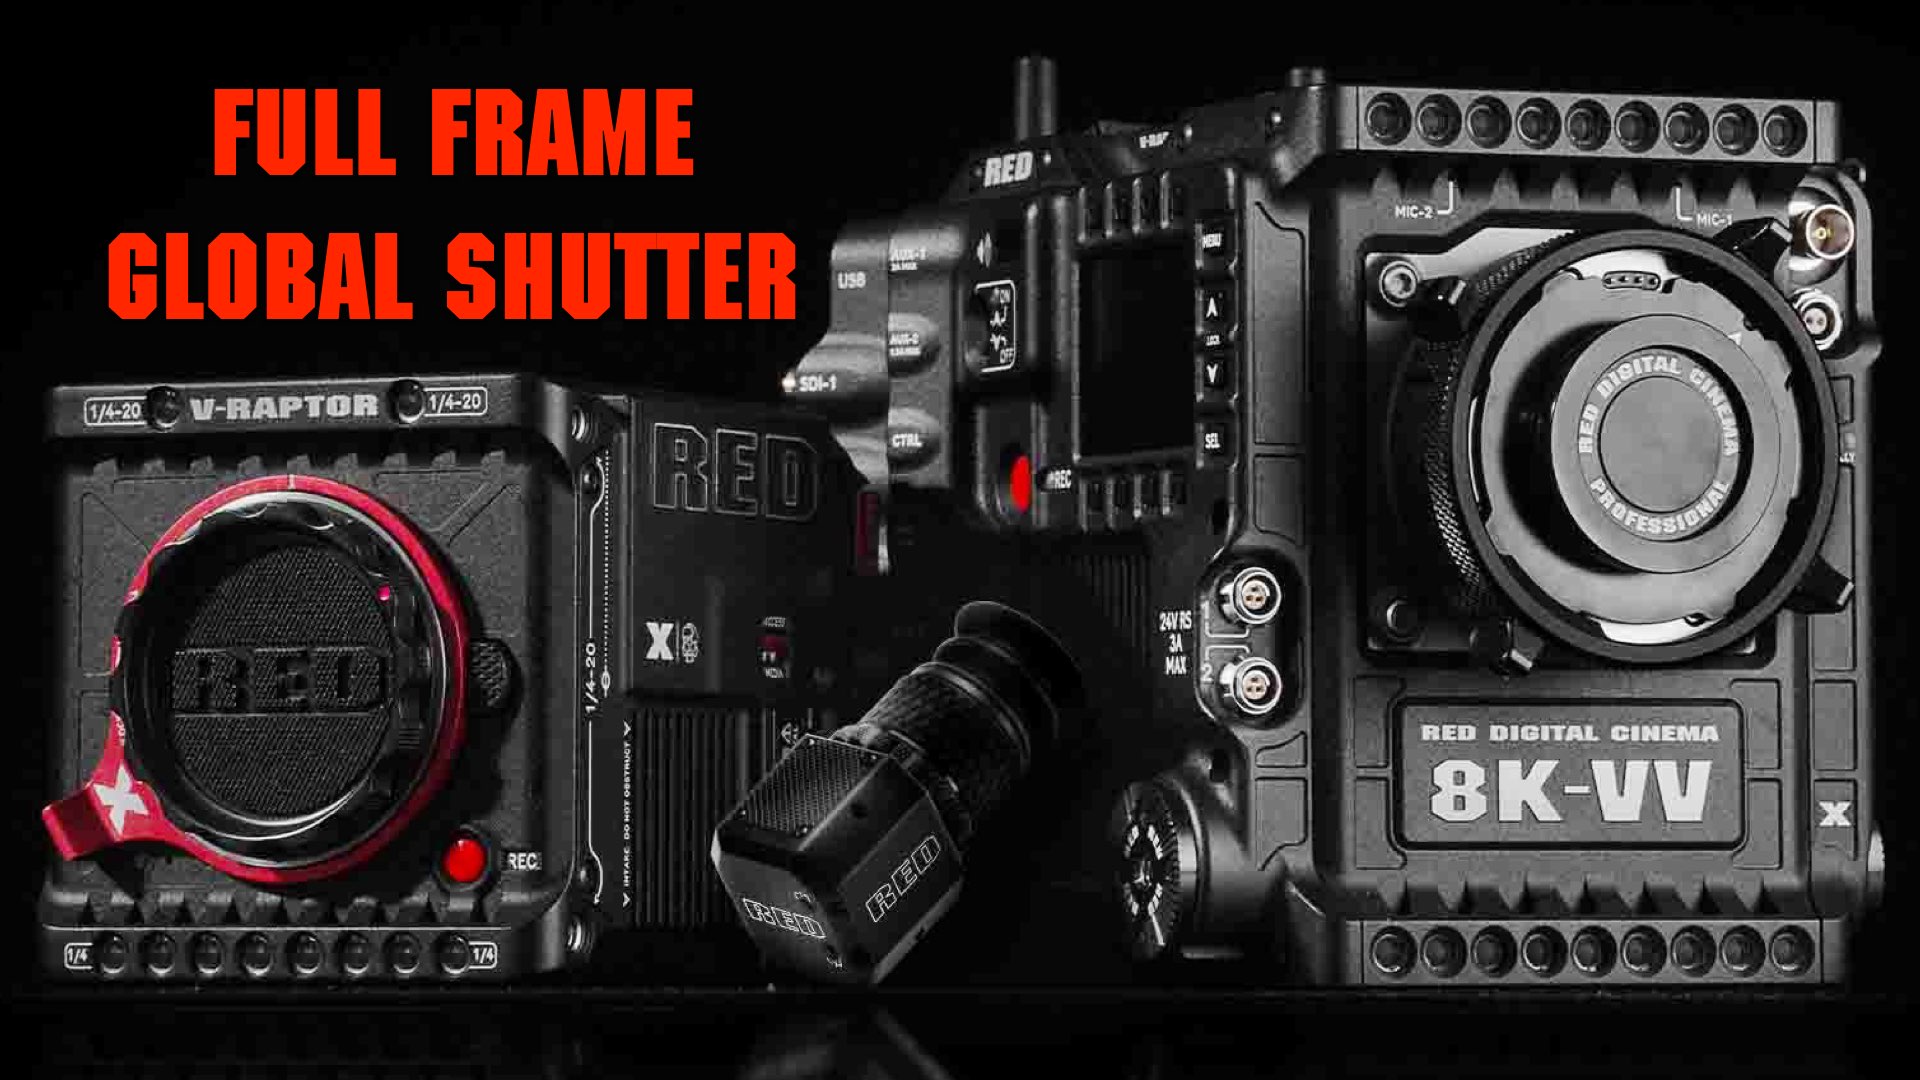 RED Announces V-Raptor [X] and XL [X]: World's First Large Format Global Shutter Cinema Cameras